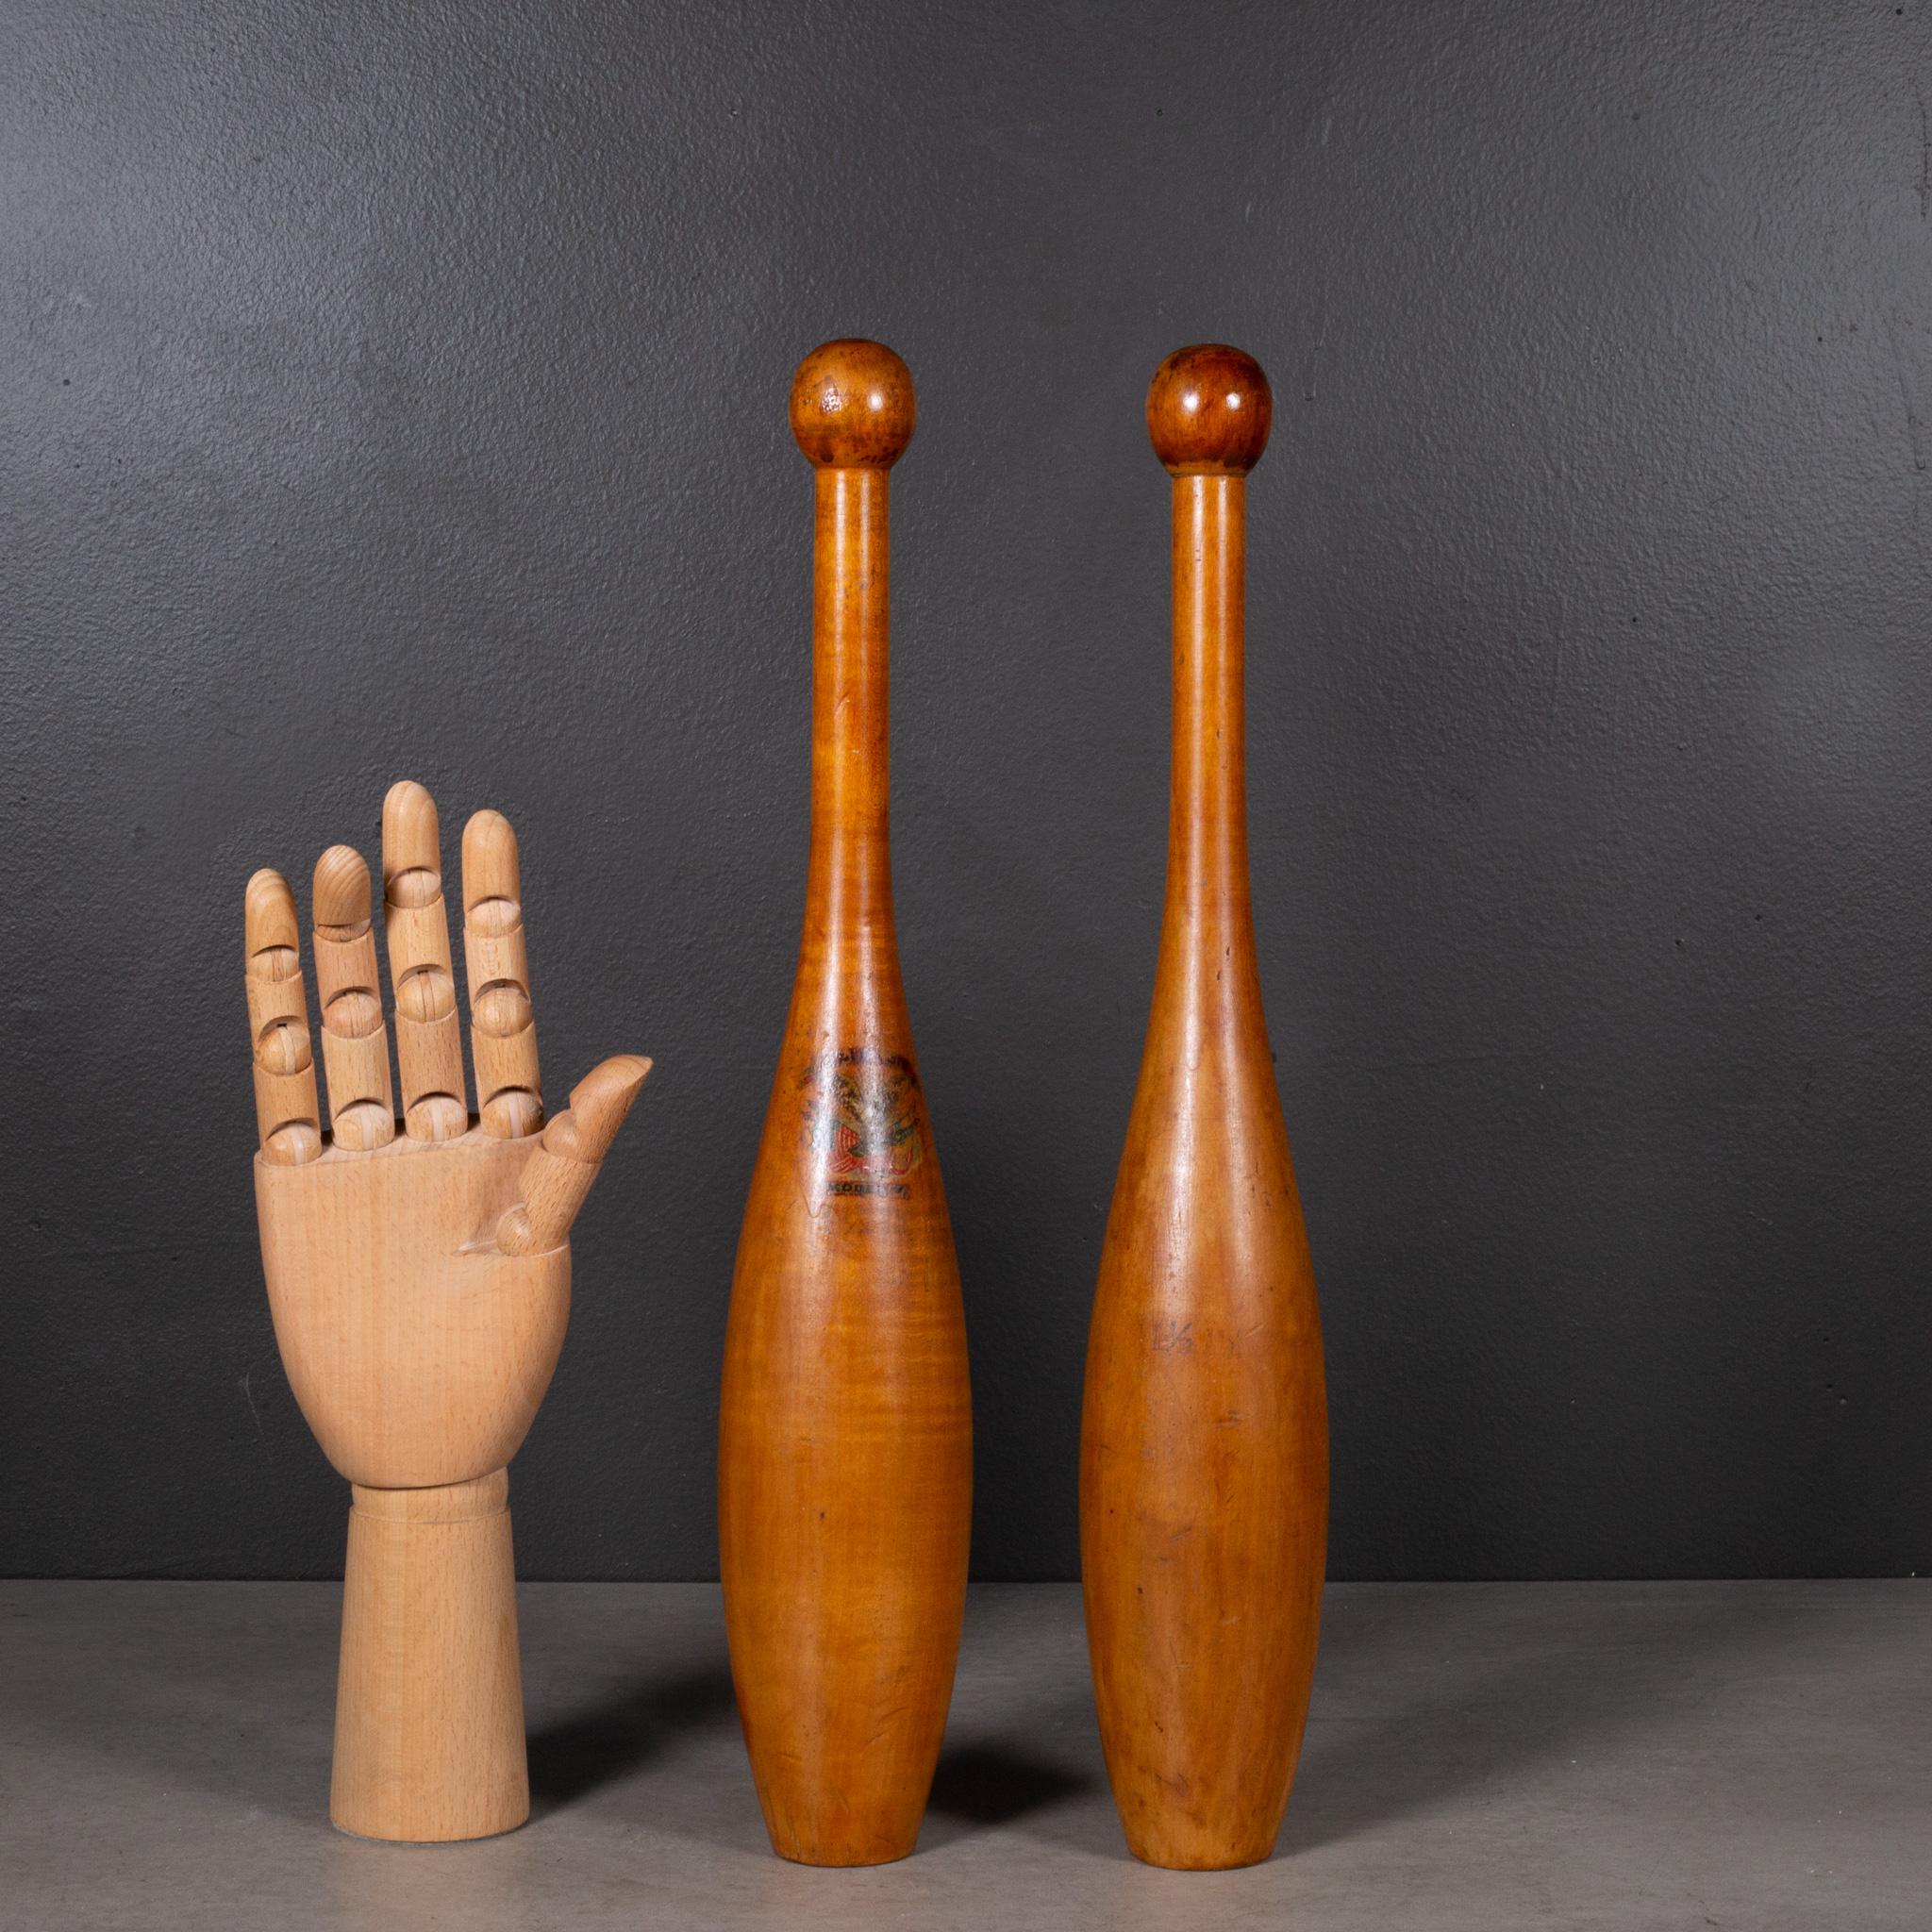 Turn of the Century Wooden Excercise/Juggling Pins c.1900 (FREE SHIPPING) In Good Condition For Sale In San Francisco, CA